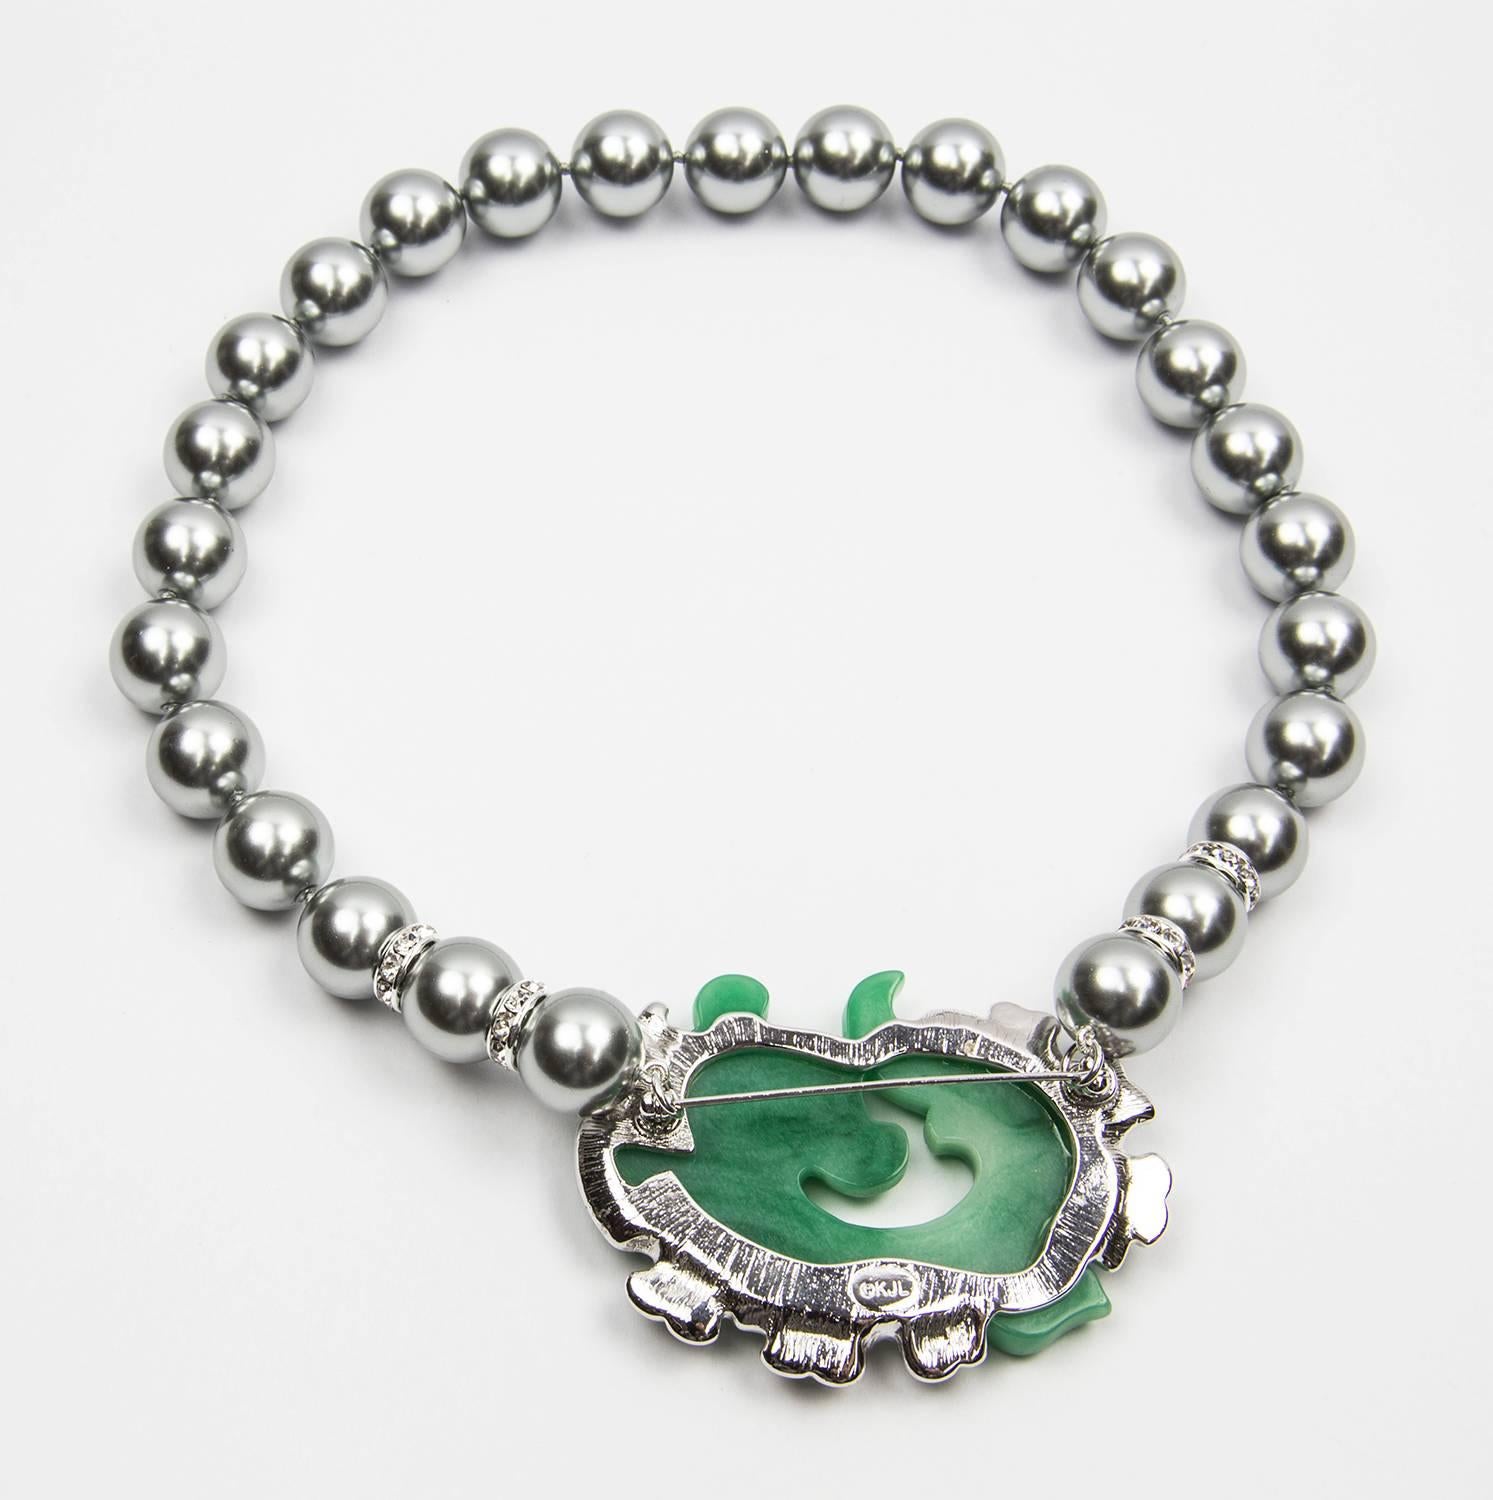 Divine Kenneth J Lane Etched Oriental Faux Jade Dragon and Luminous Faux Silver Tahitian Pearls, Brooch Pendant Necklace. Approx. length of necklace: 15”. Fish Dragon design Brooch marked: KJL; body of the dragon is faux jade, eye set with a